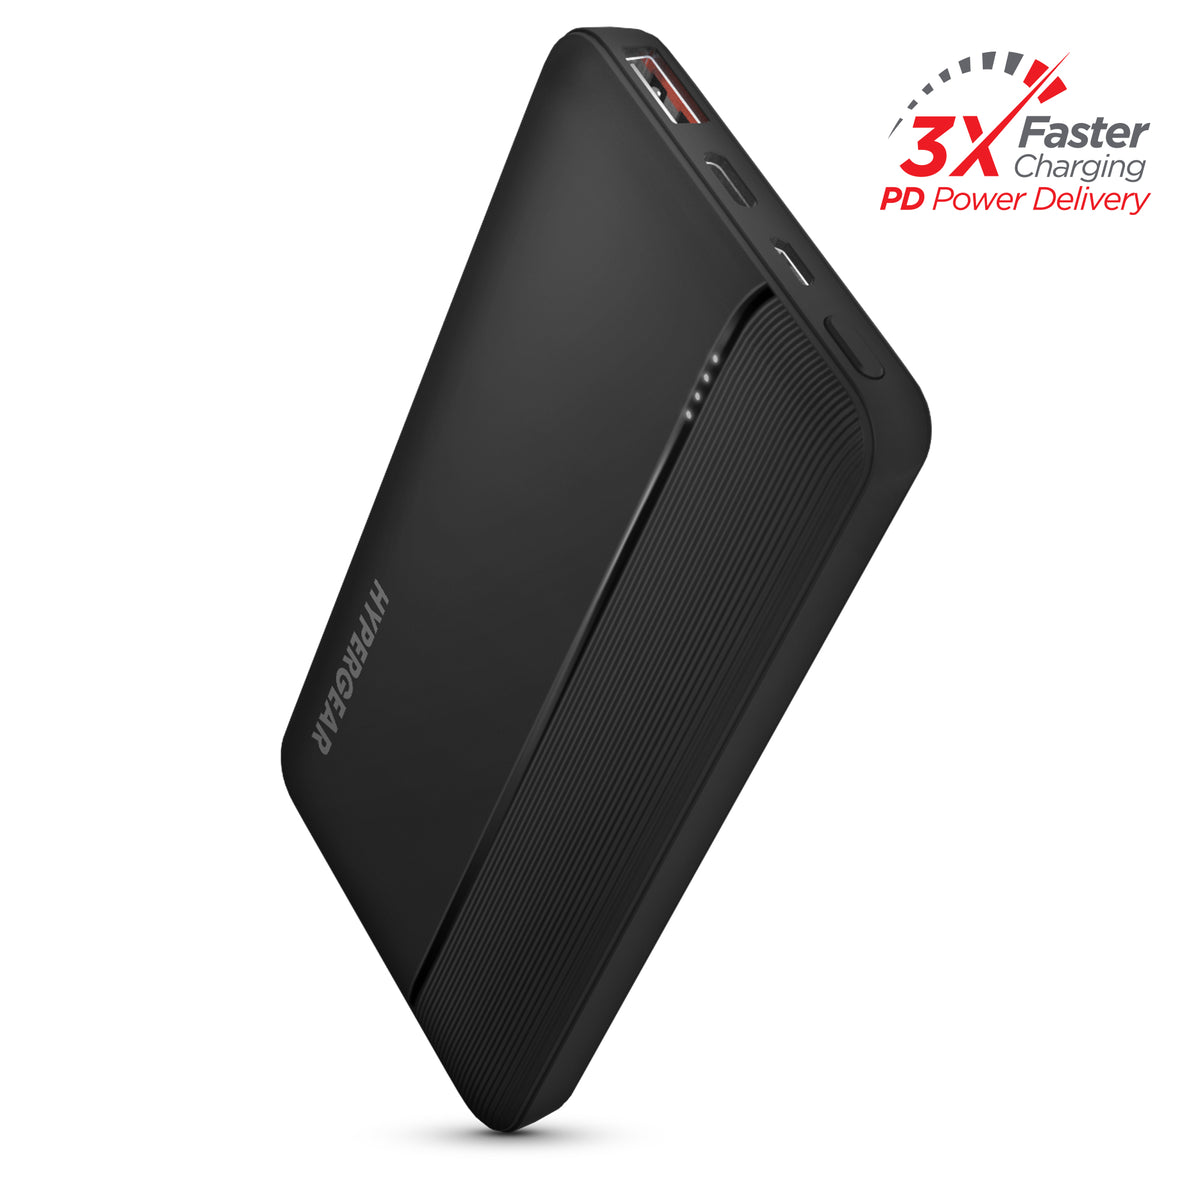 essay Het formulier Snazzy 10,000mAh | Fast Charge Power Bank with 20W USB-C PD | HyperGear – HYPERGEAR